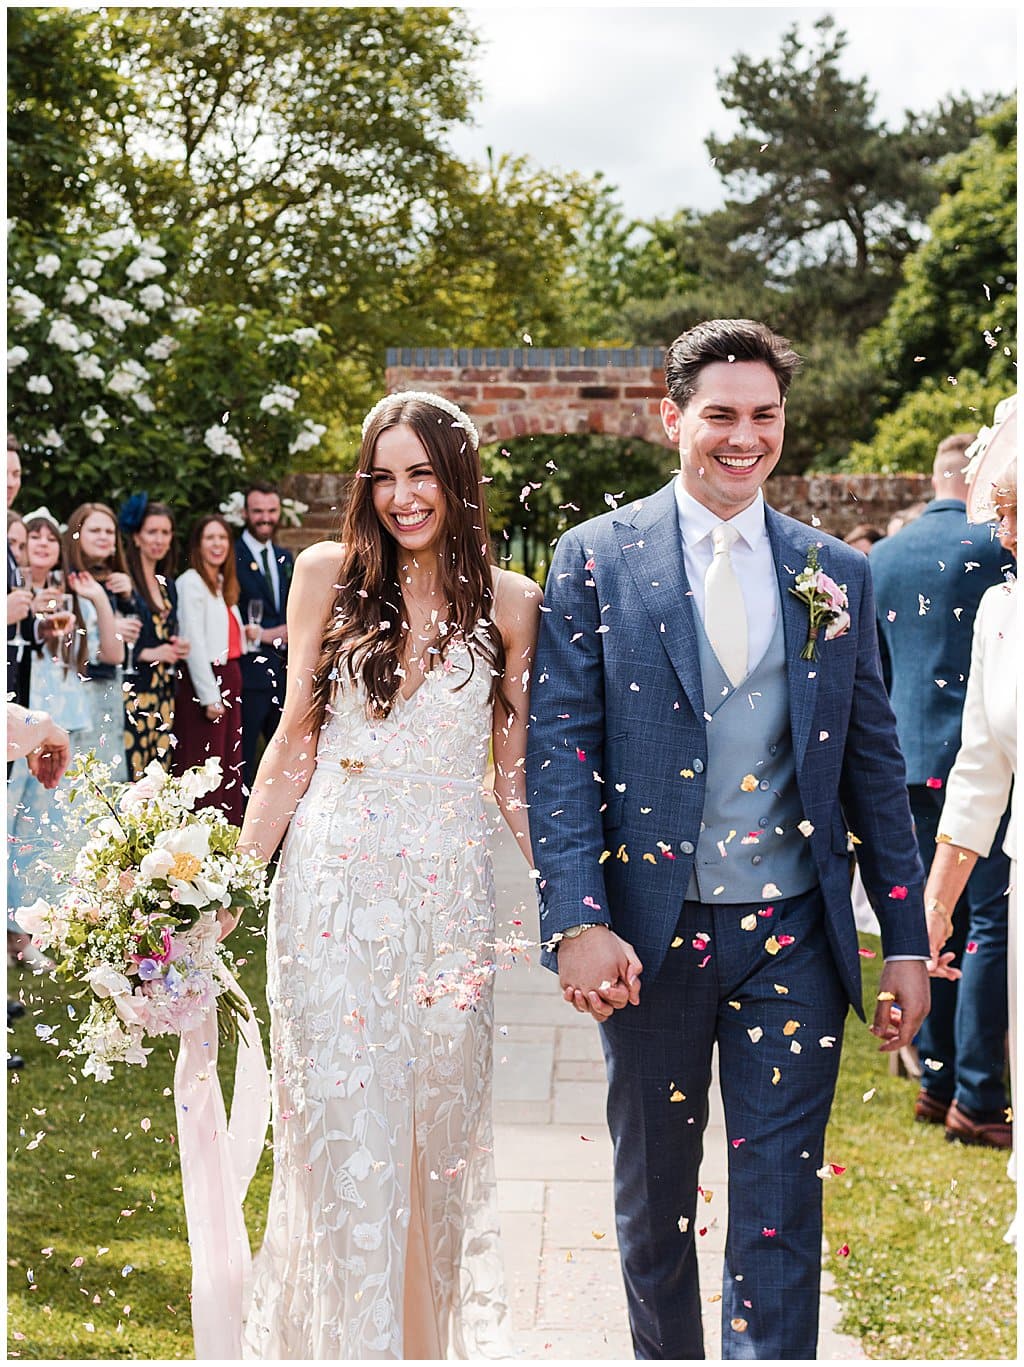 walking confetti photo of a Bride and Groom at Alrewas Hayes in the Summer